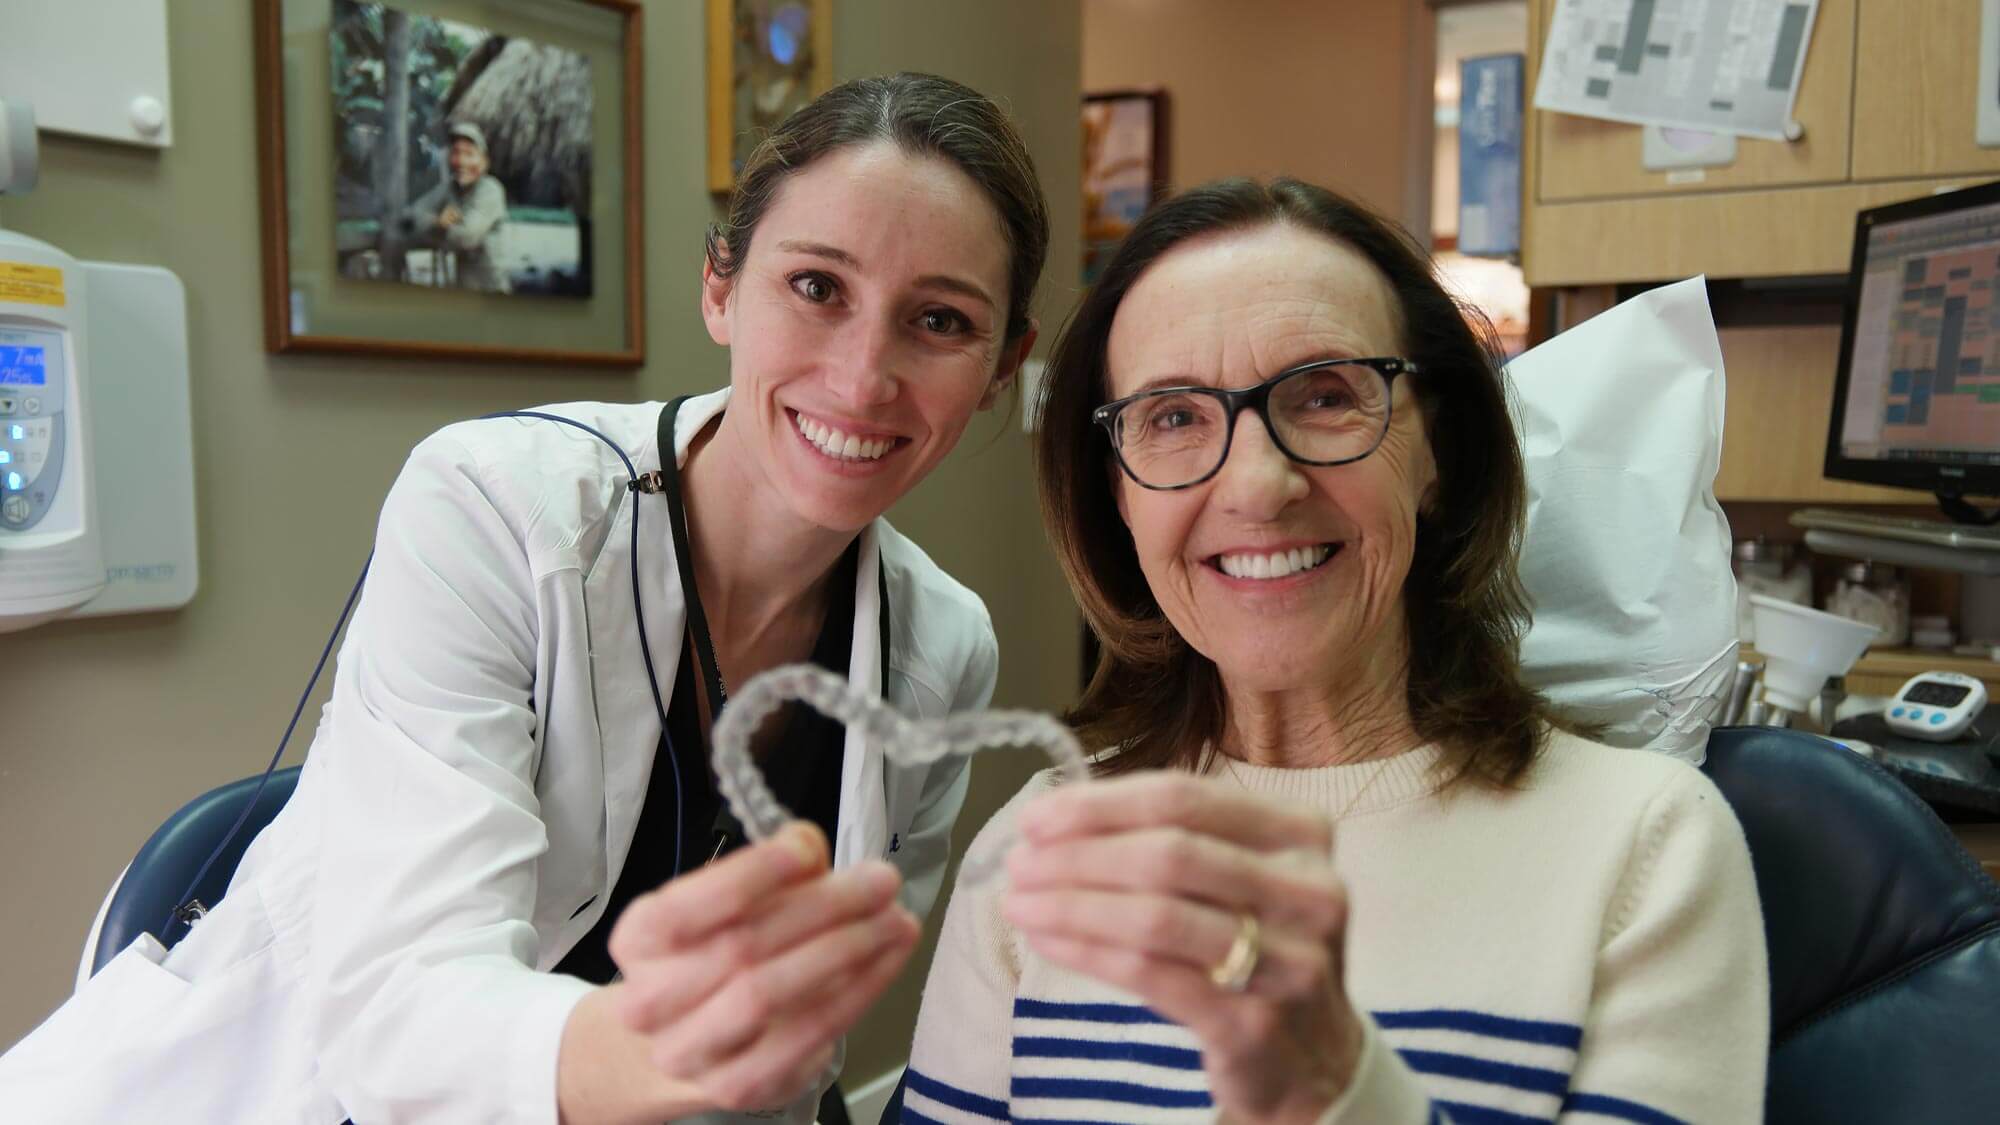 Doctor and patient holding up clear aligners.